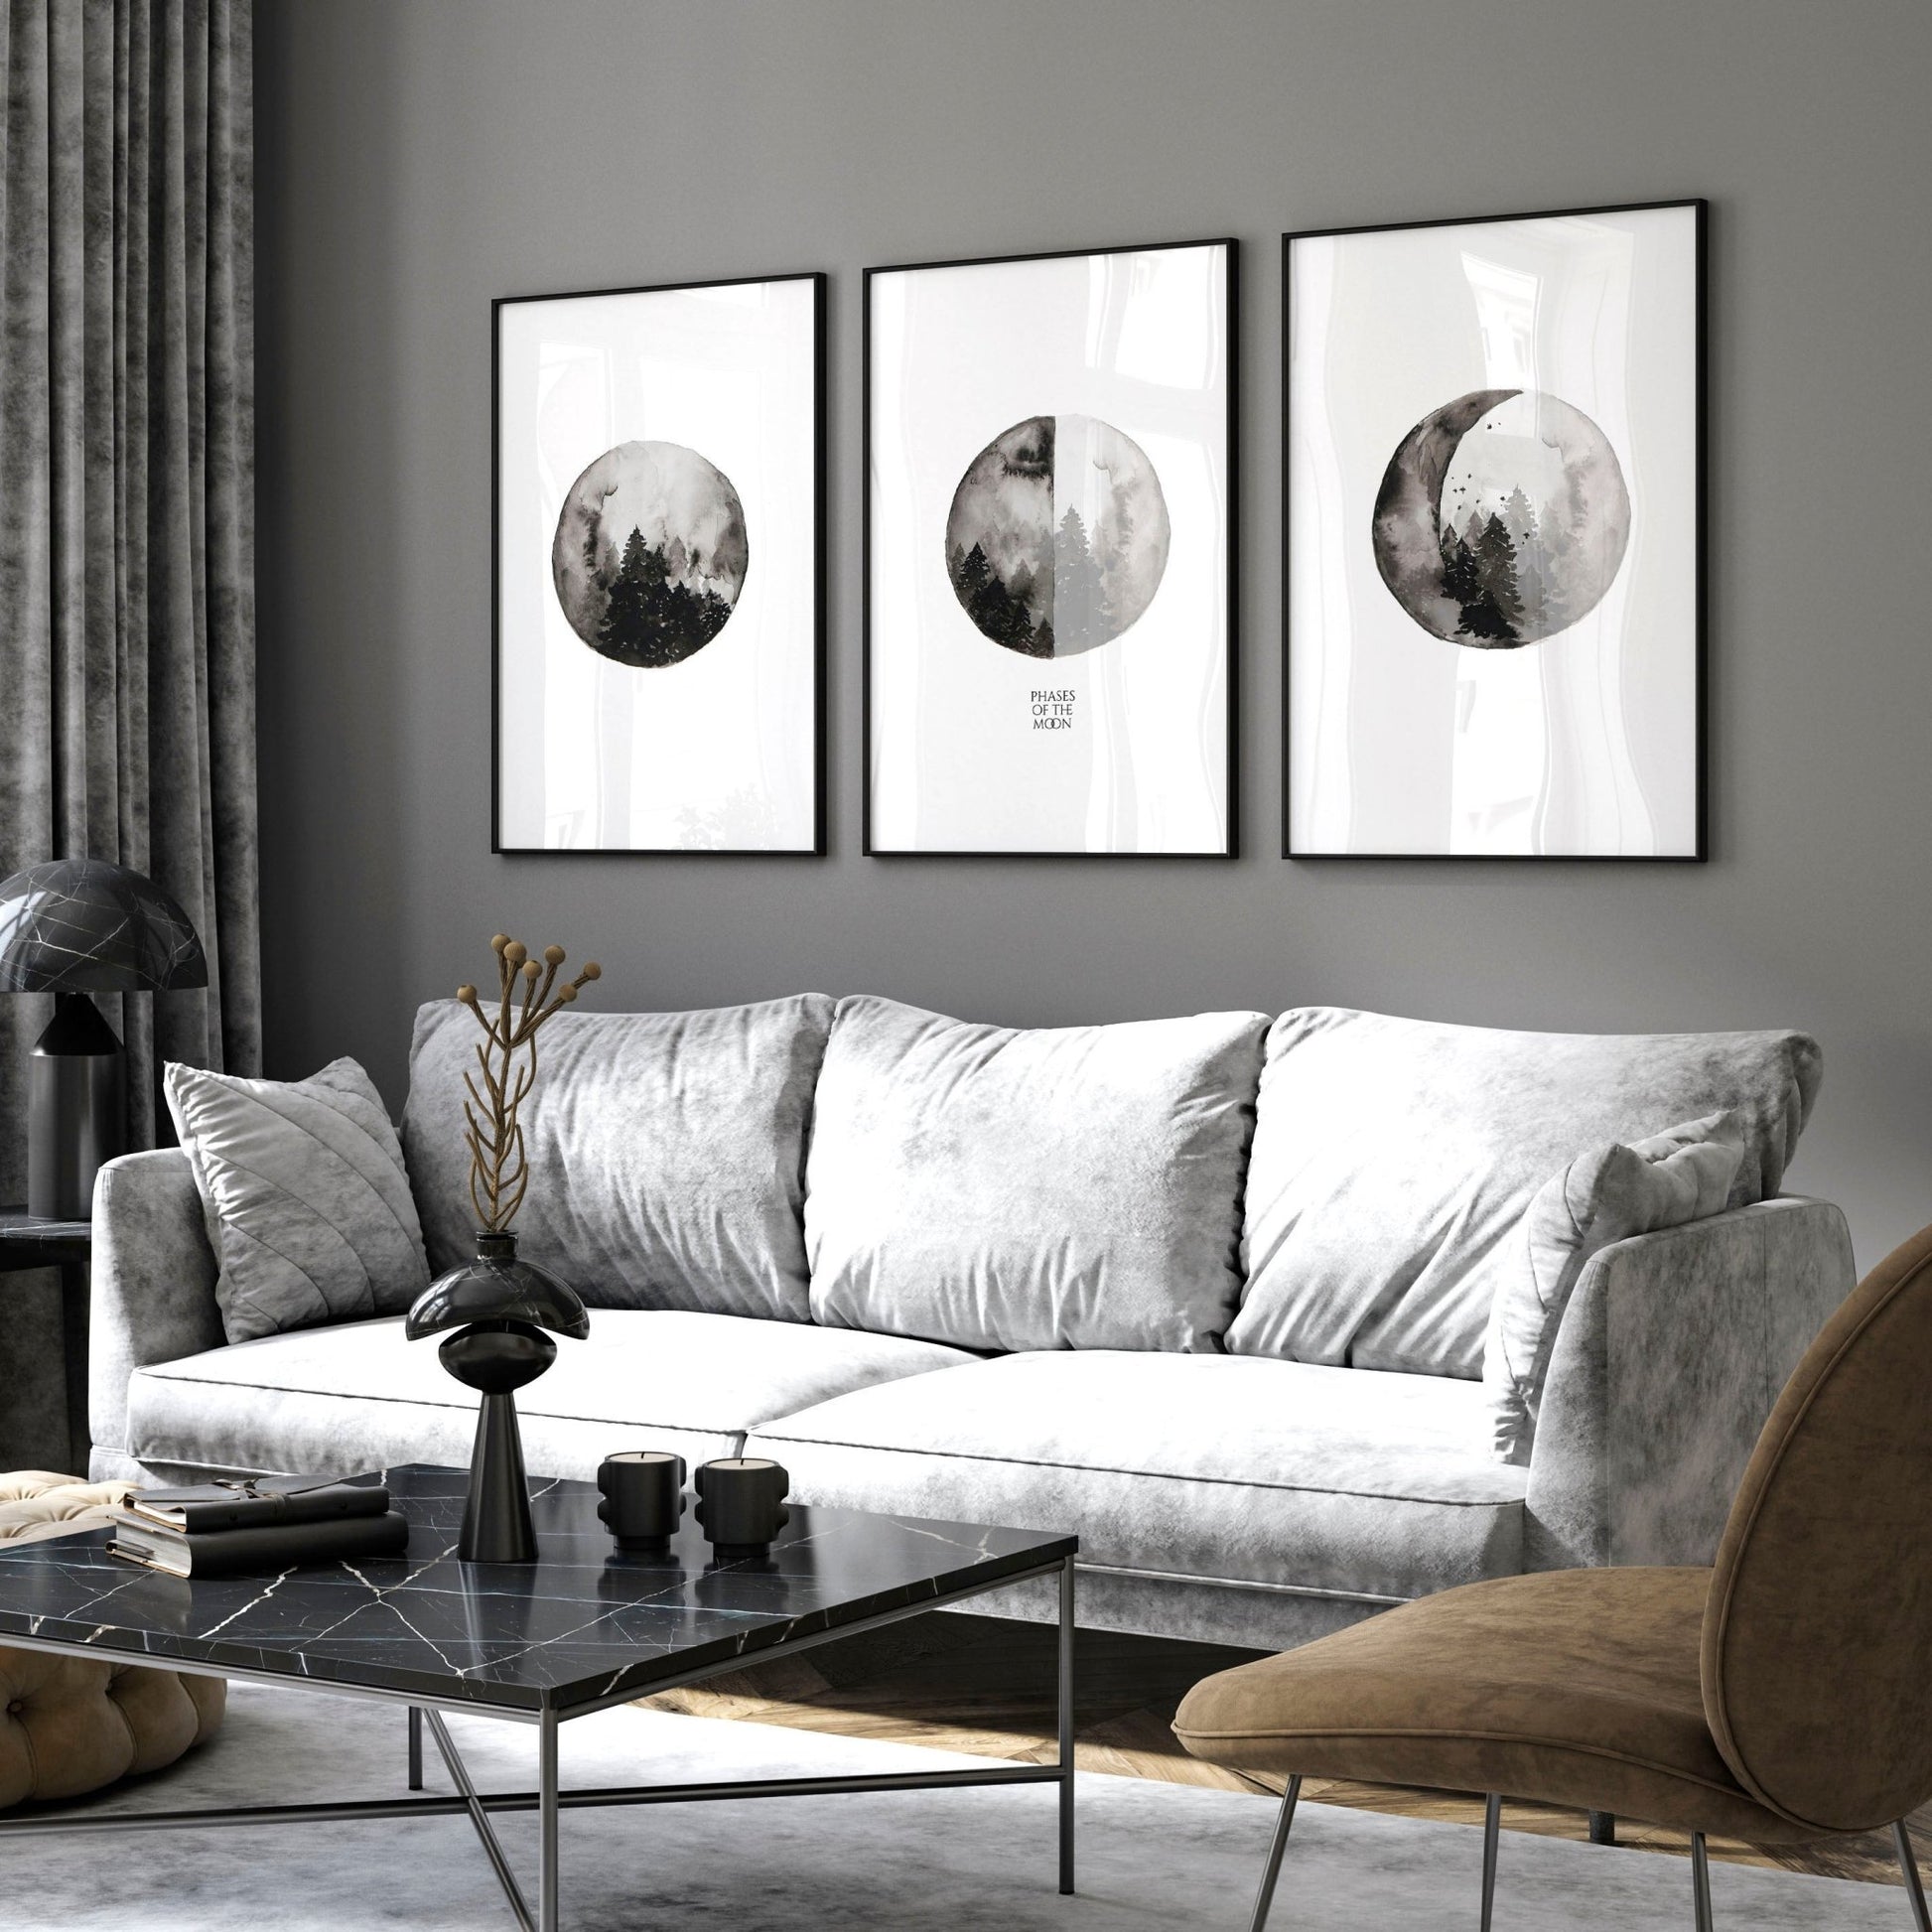 Moon phases wall art | set of 3 wall art prints - About Wall Art